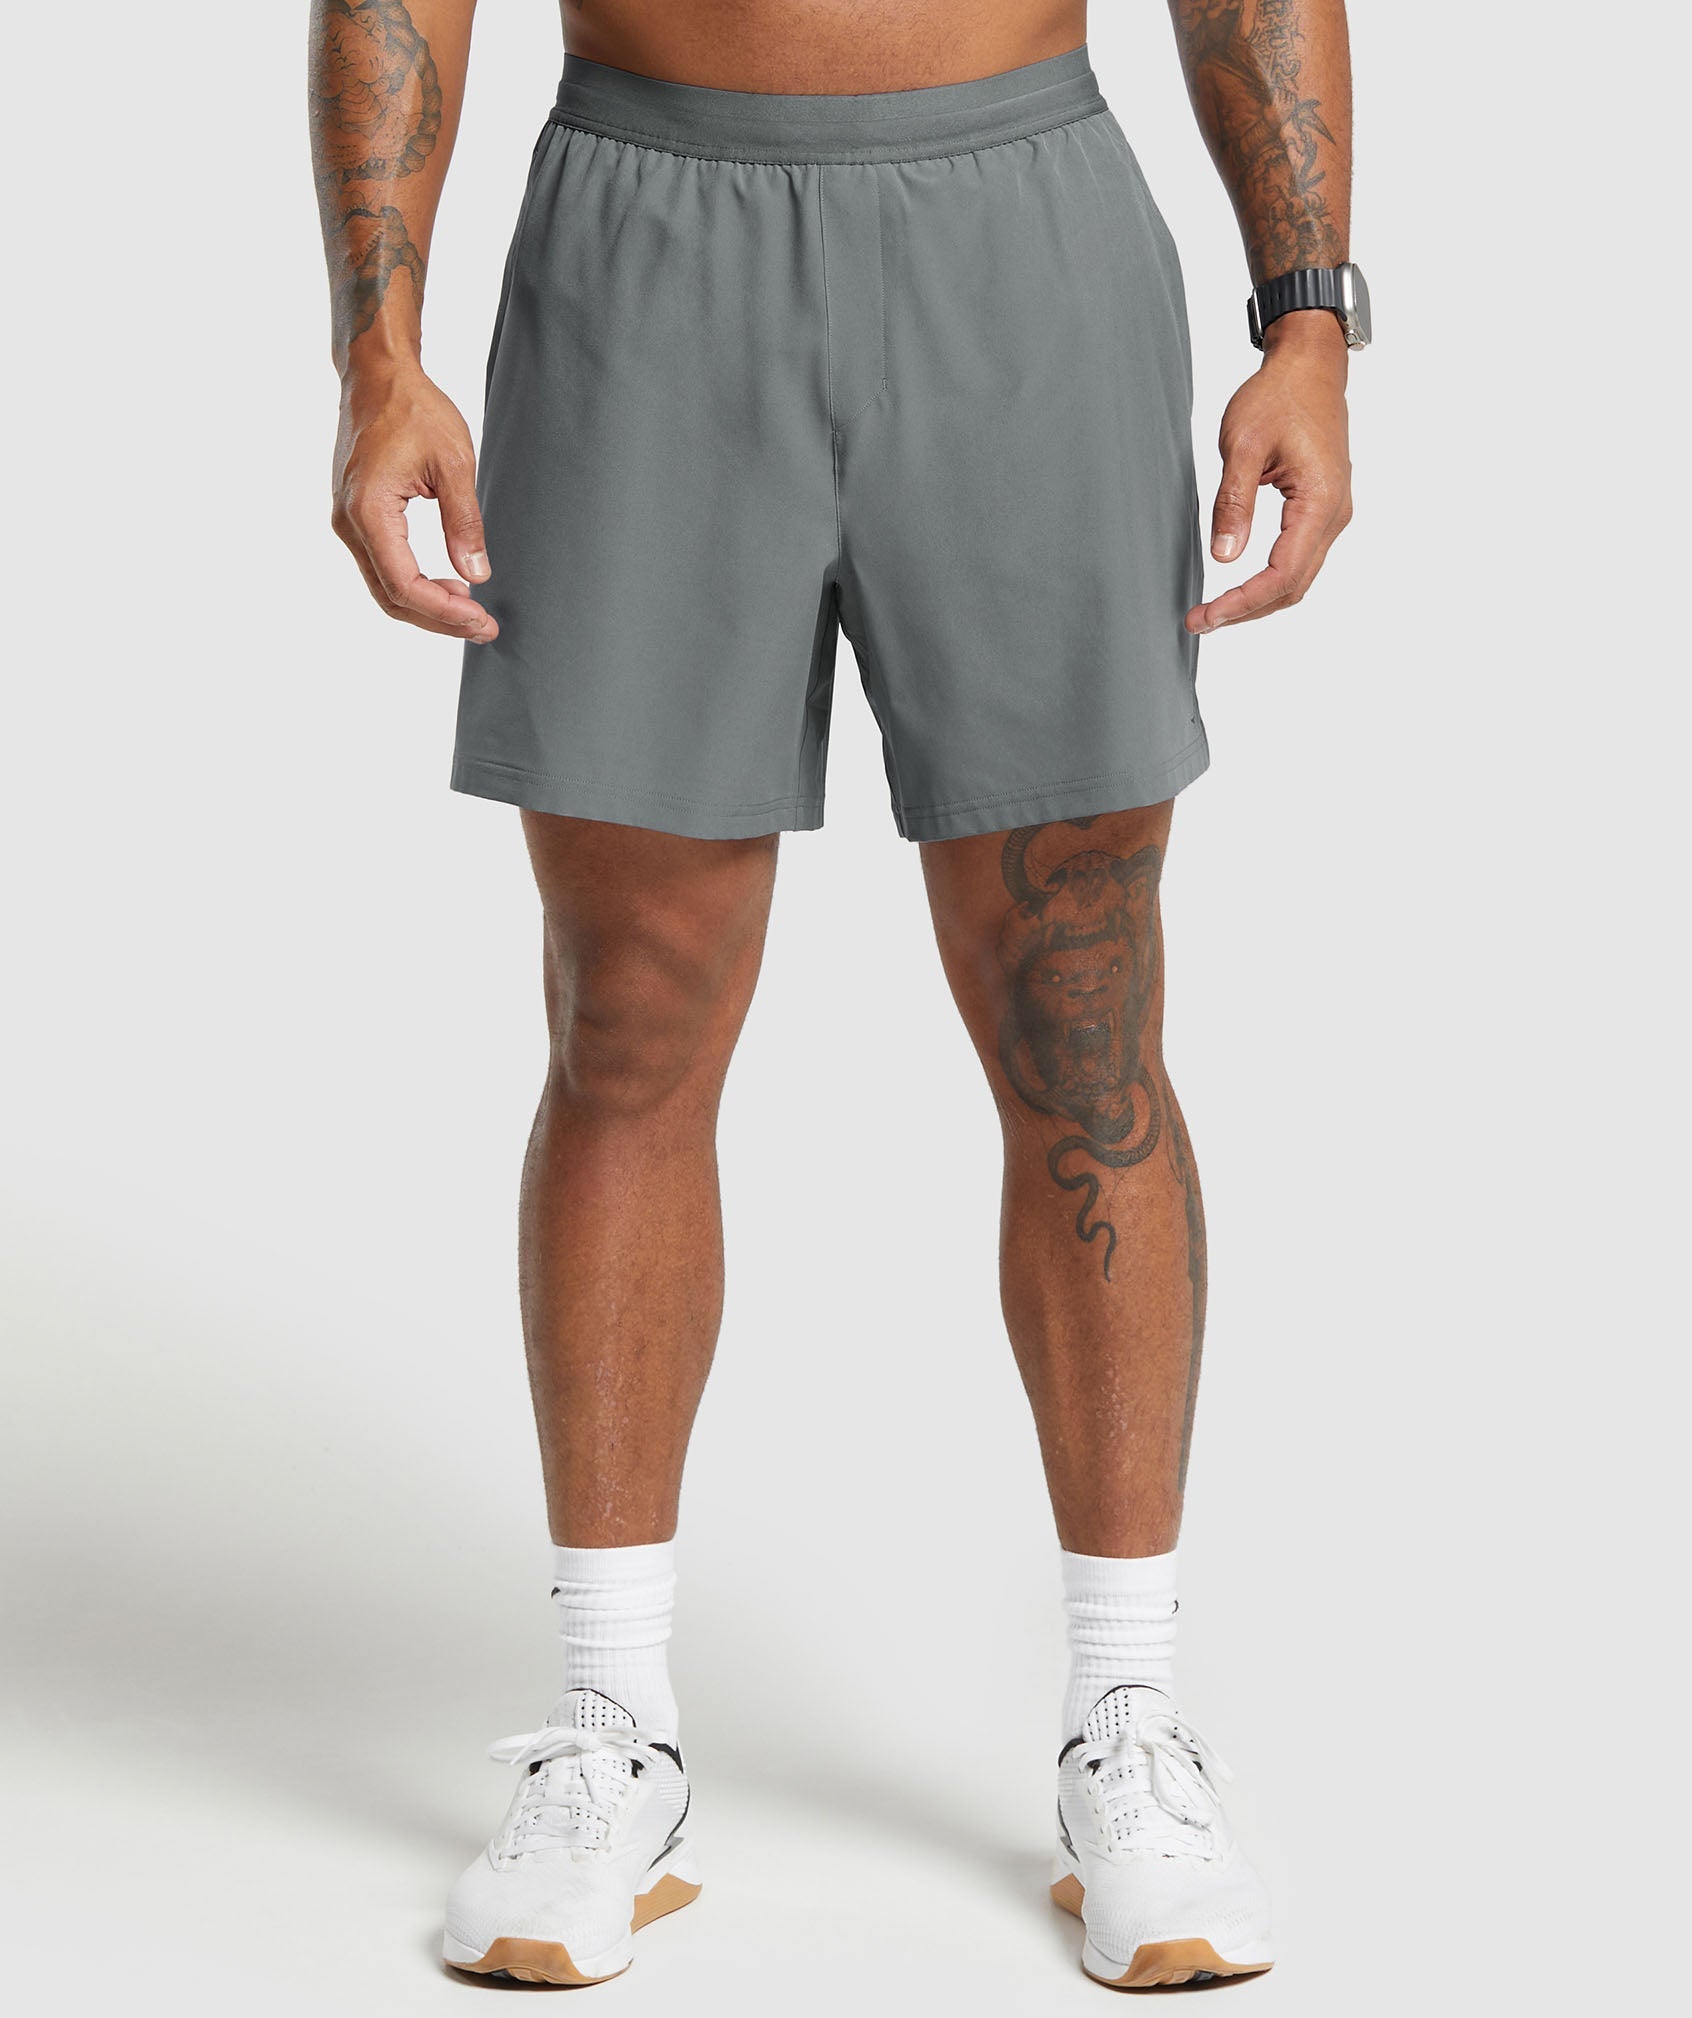 Land to Water 6" Shorts in Pitch Grey - view 1